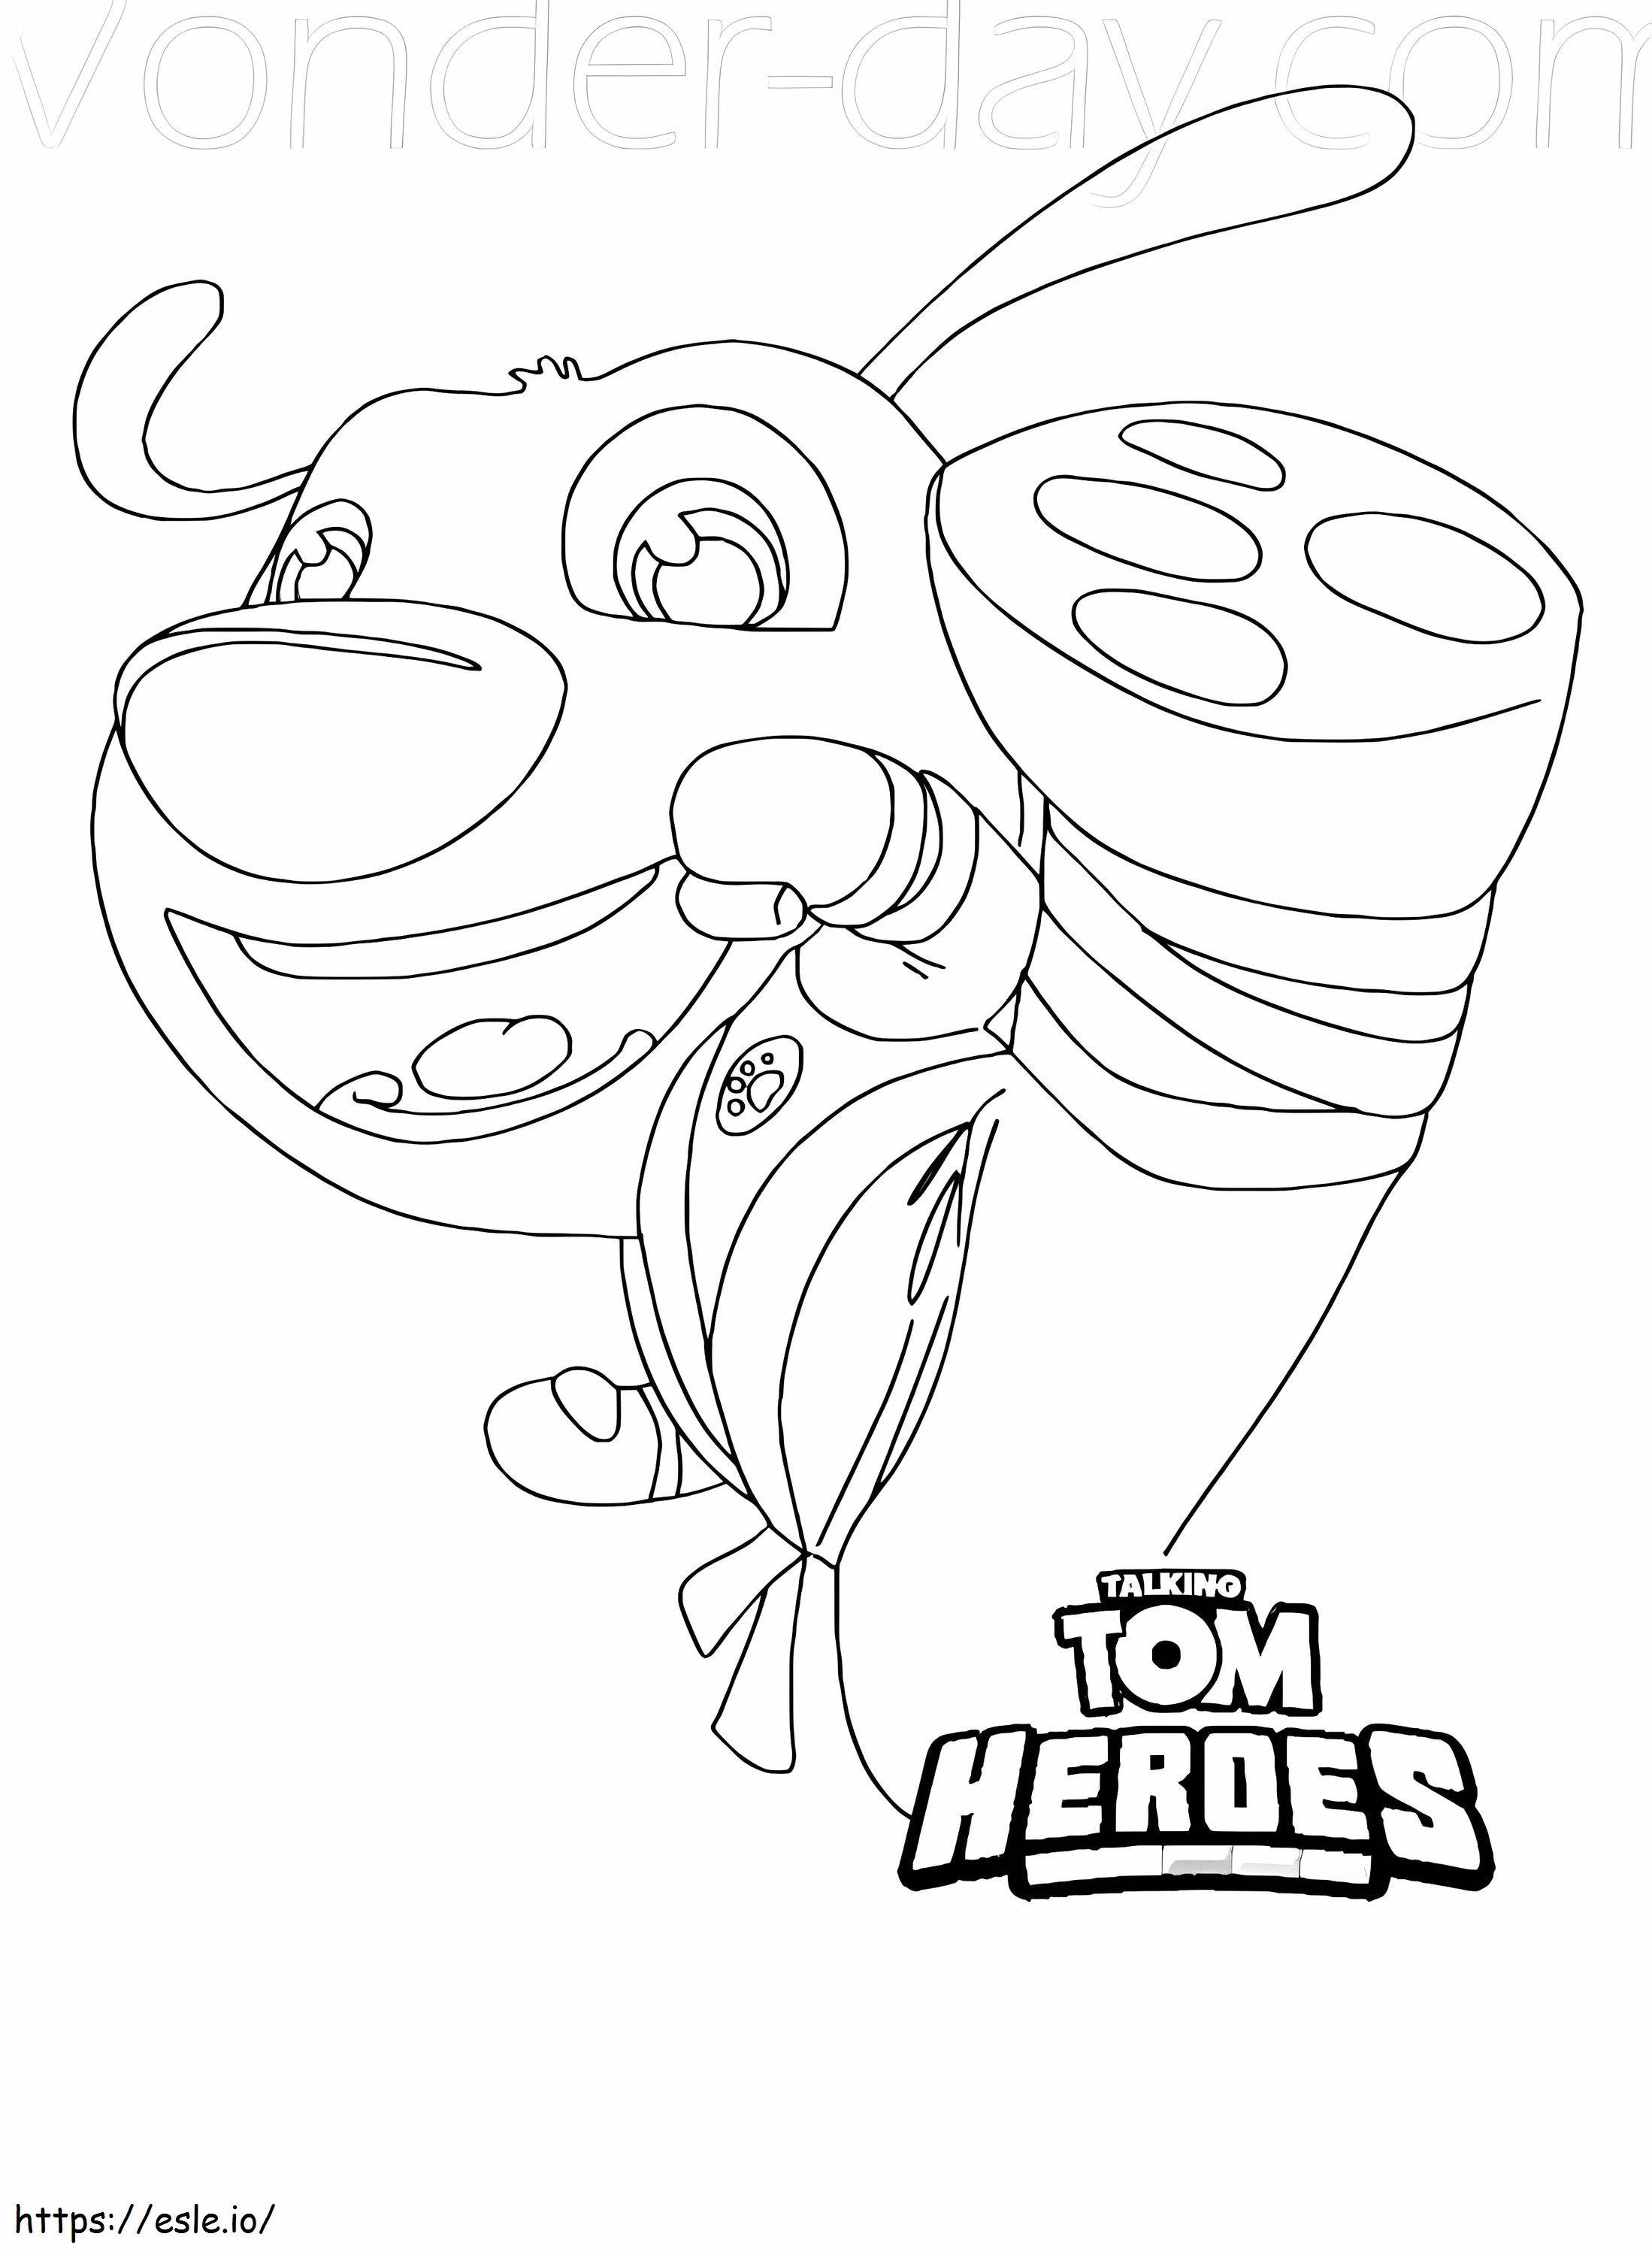 Hank From Talking Tom Heroes coloring page